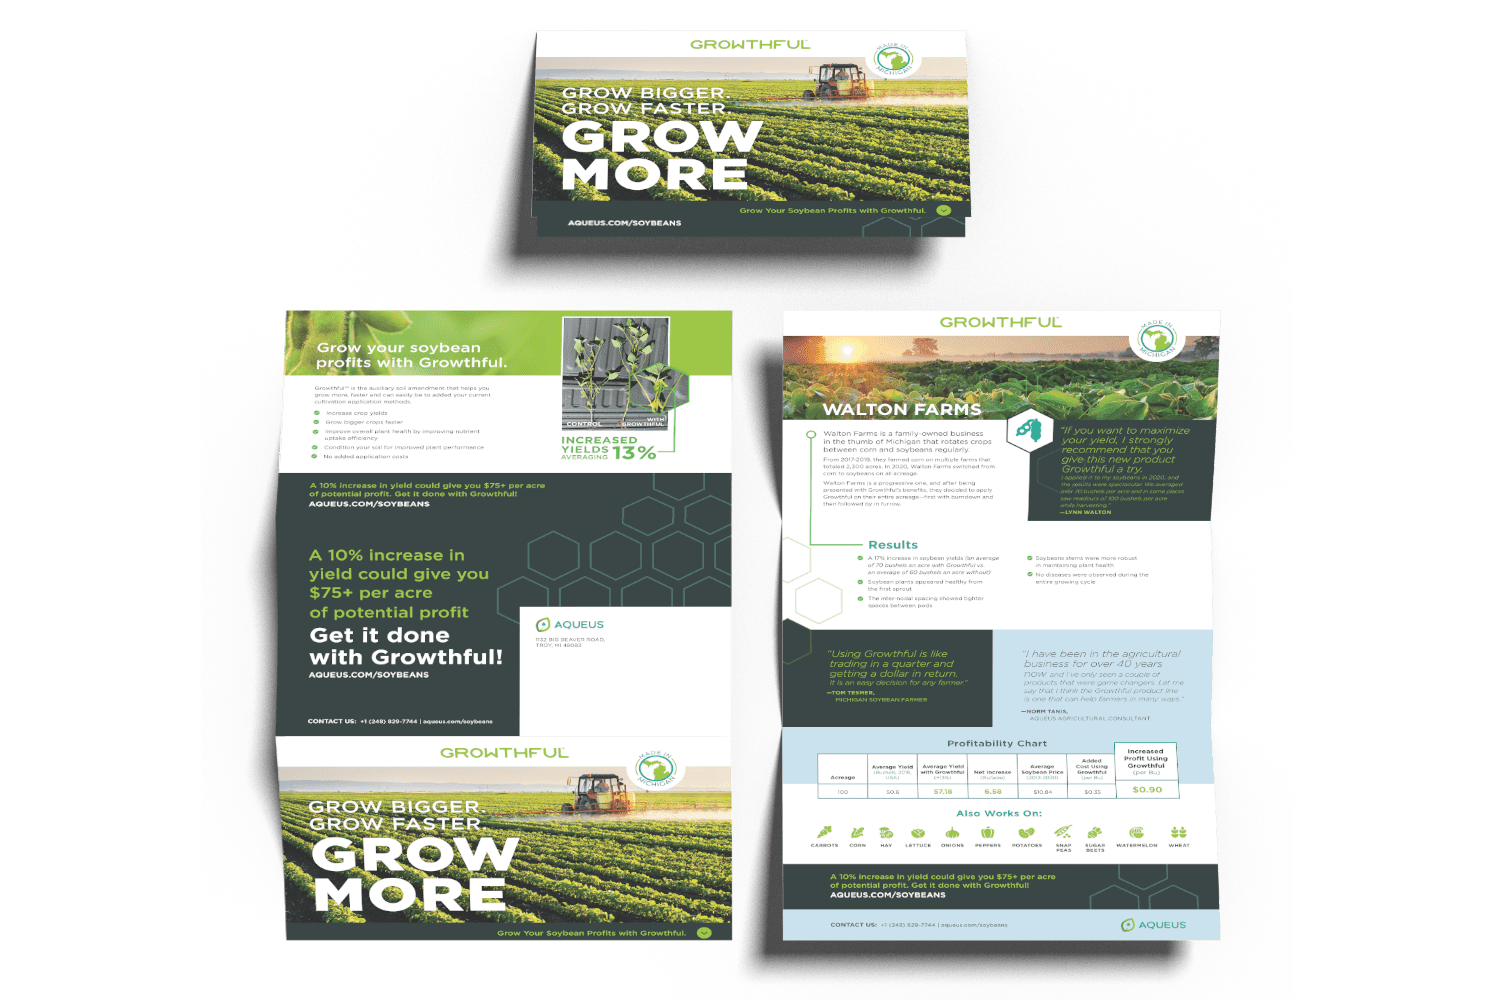 Mockup showing all the different panels of the direct mail